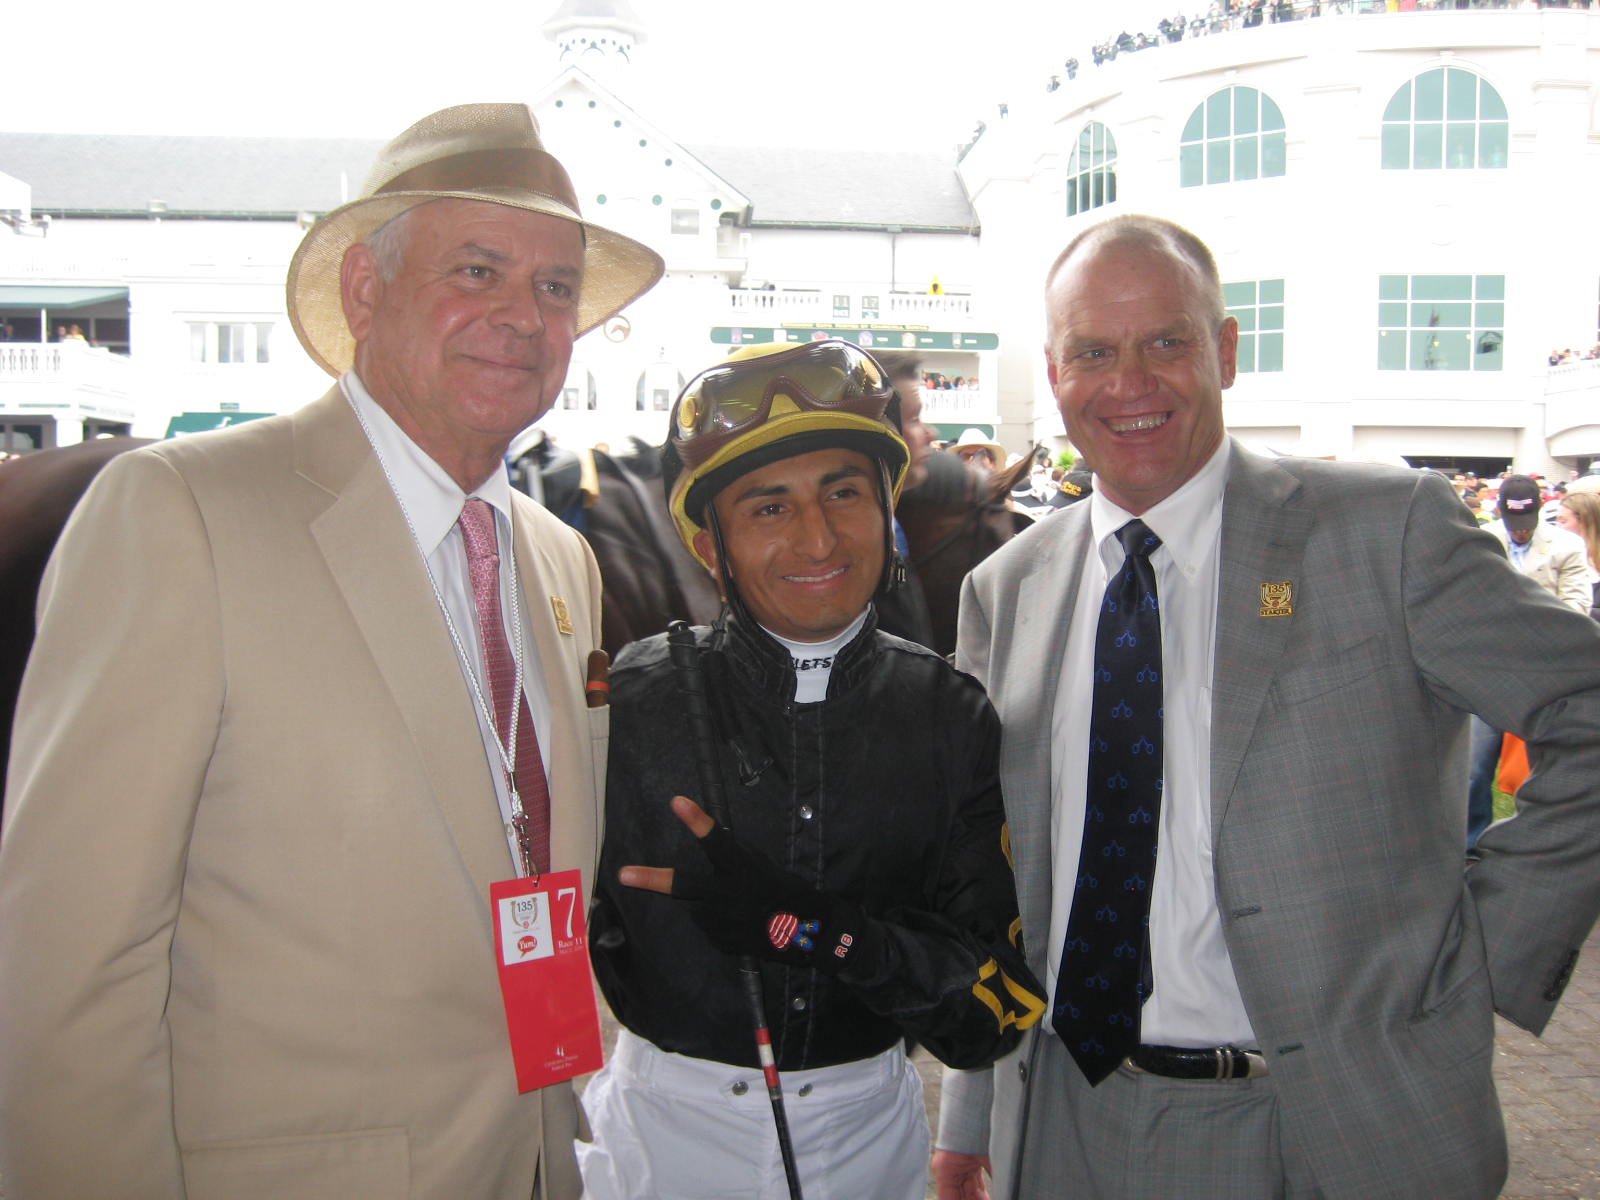 Owner Bo Hirsch (at left) with Papa Clem's jockey Rafael Bejarano and trainer Gary Stute before last Saturday's 135th Kentucky Derby. Photo courtesy of Candy Hirsch